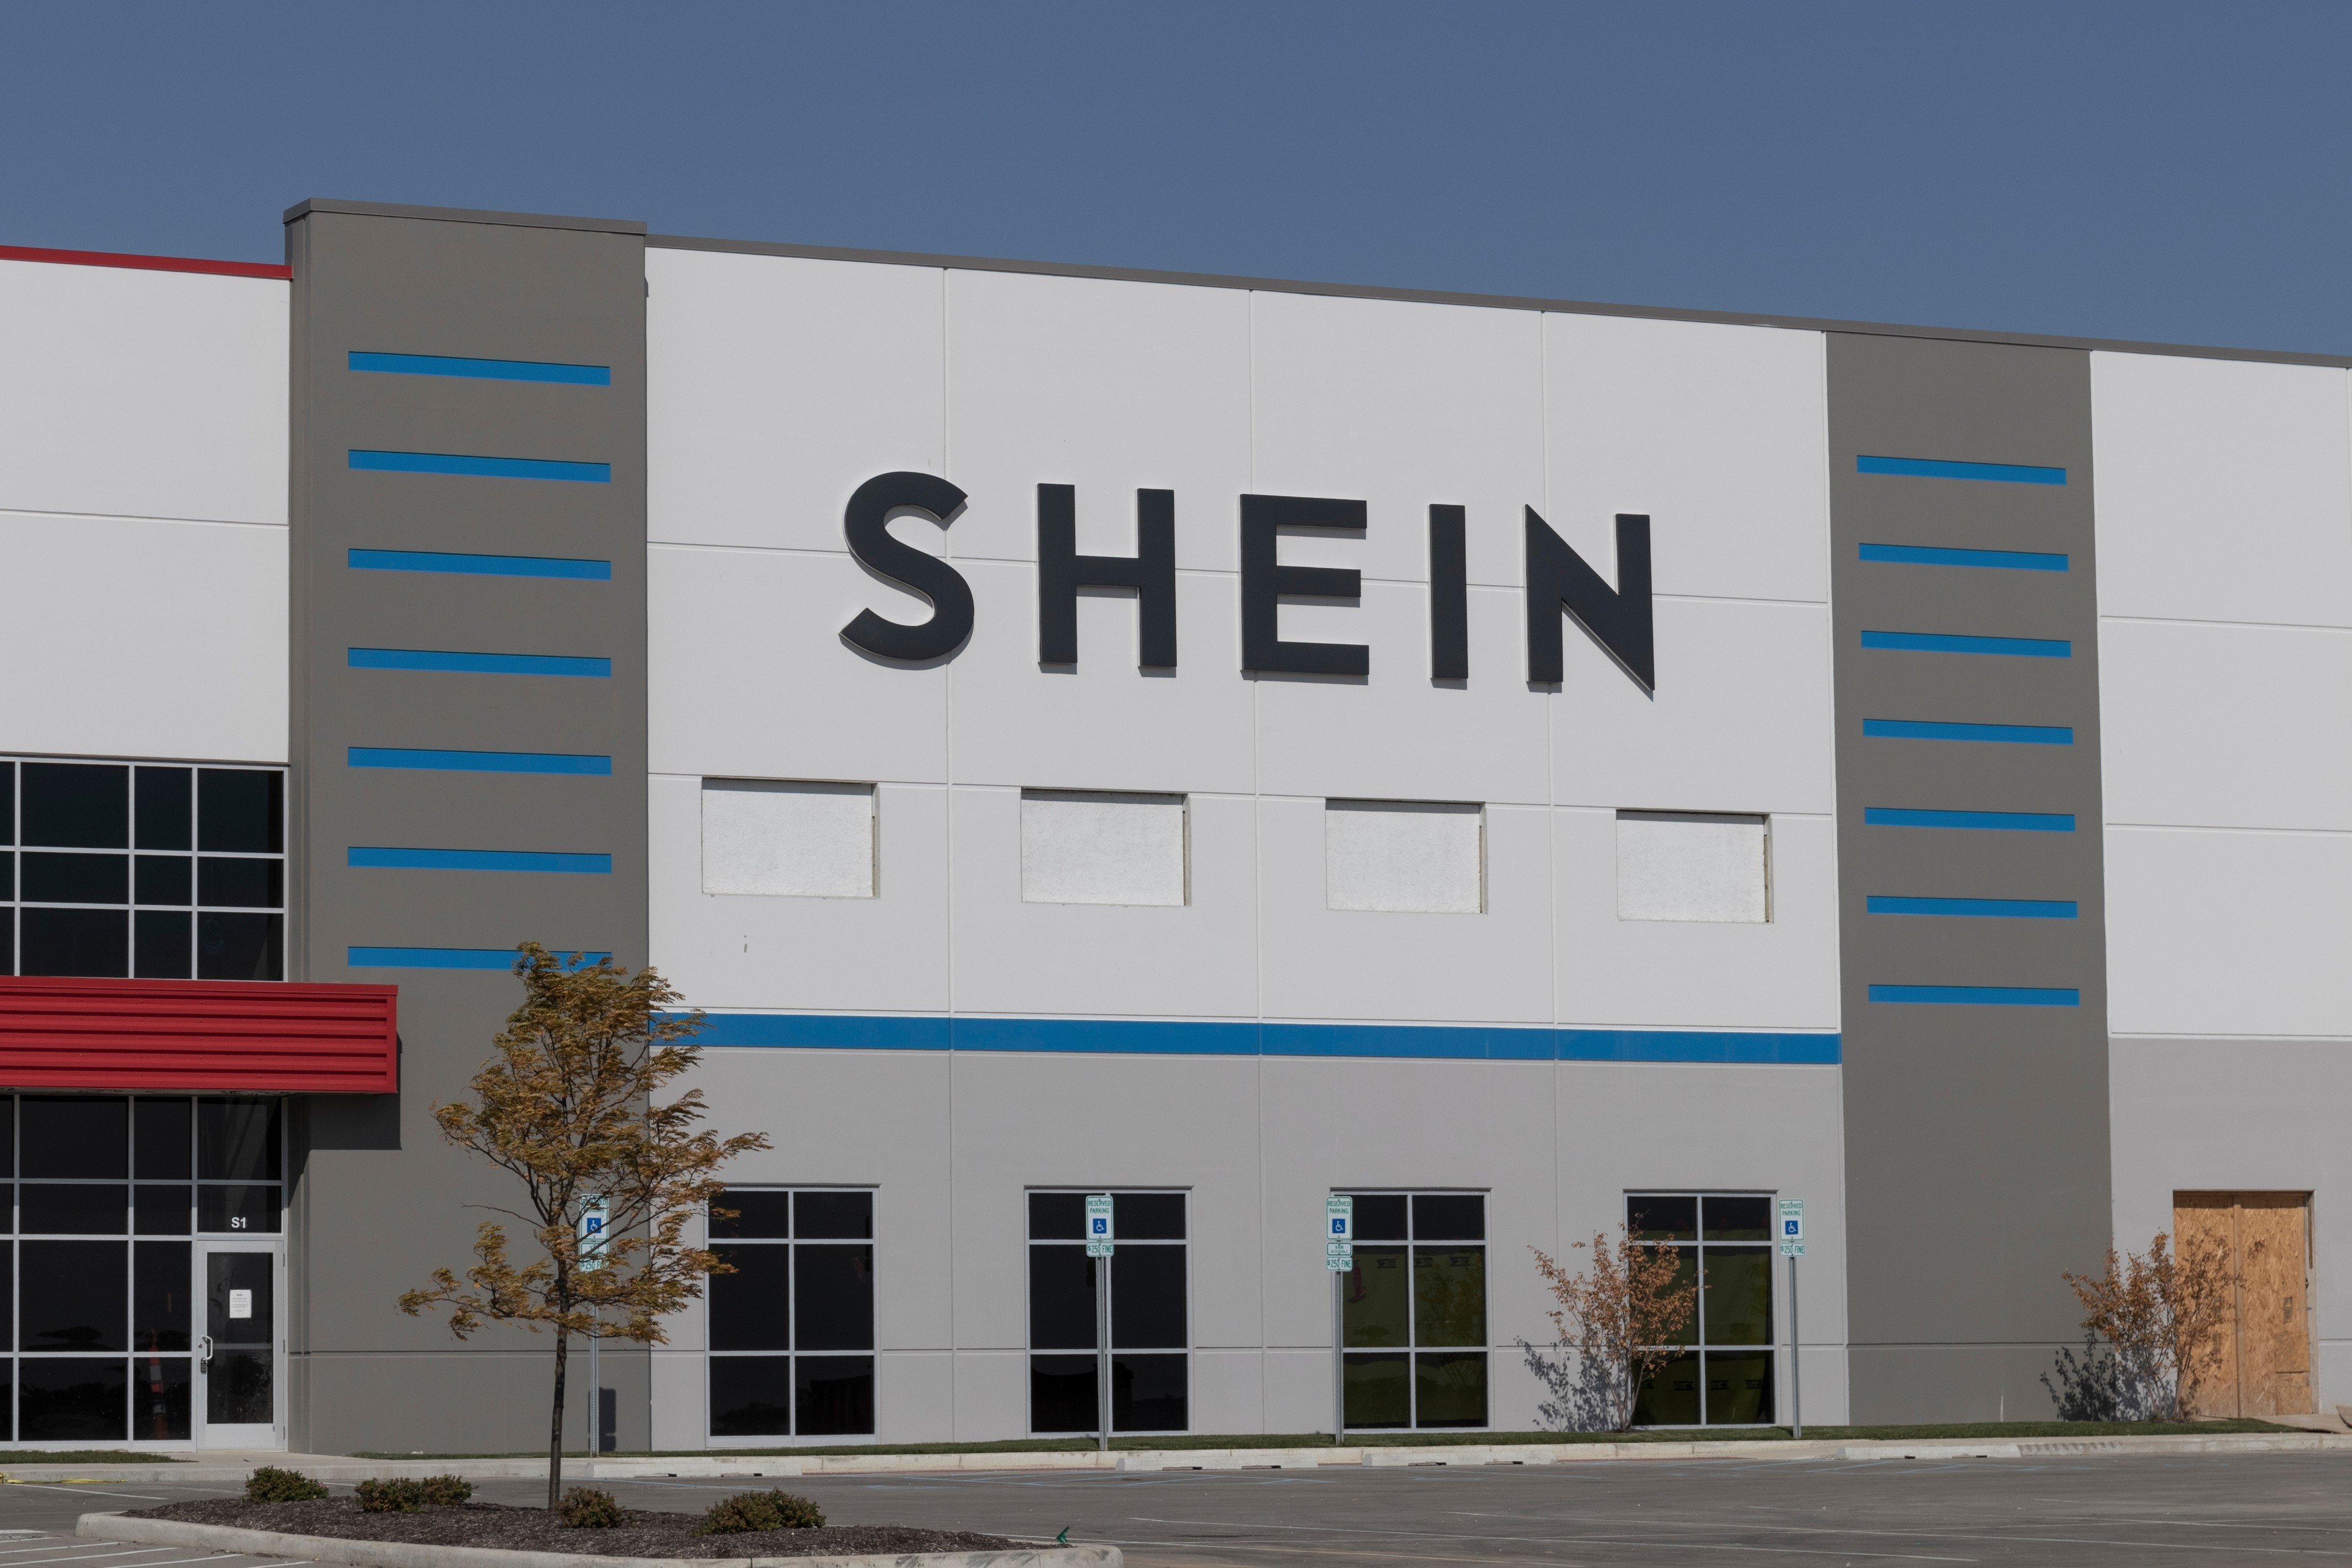 A Shein distribution centre in Whitestown, Indiana in the US seen in October 2022. Shein is looking at building a factory in Mexico as an option to diversify production away from China. Photo: Shutterstock